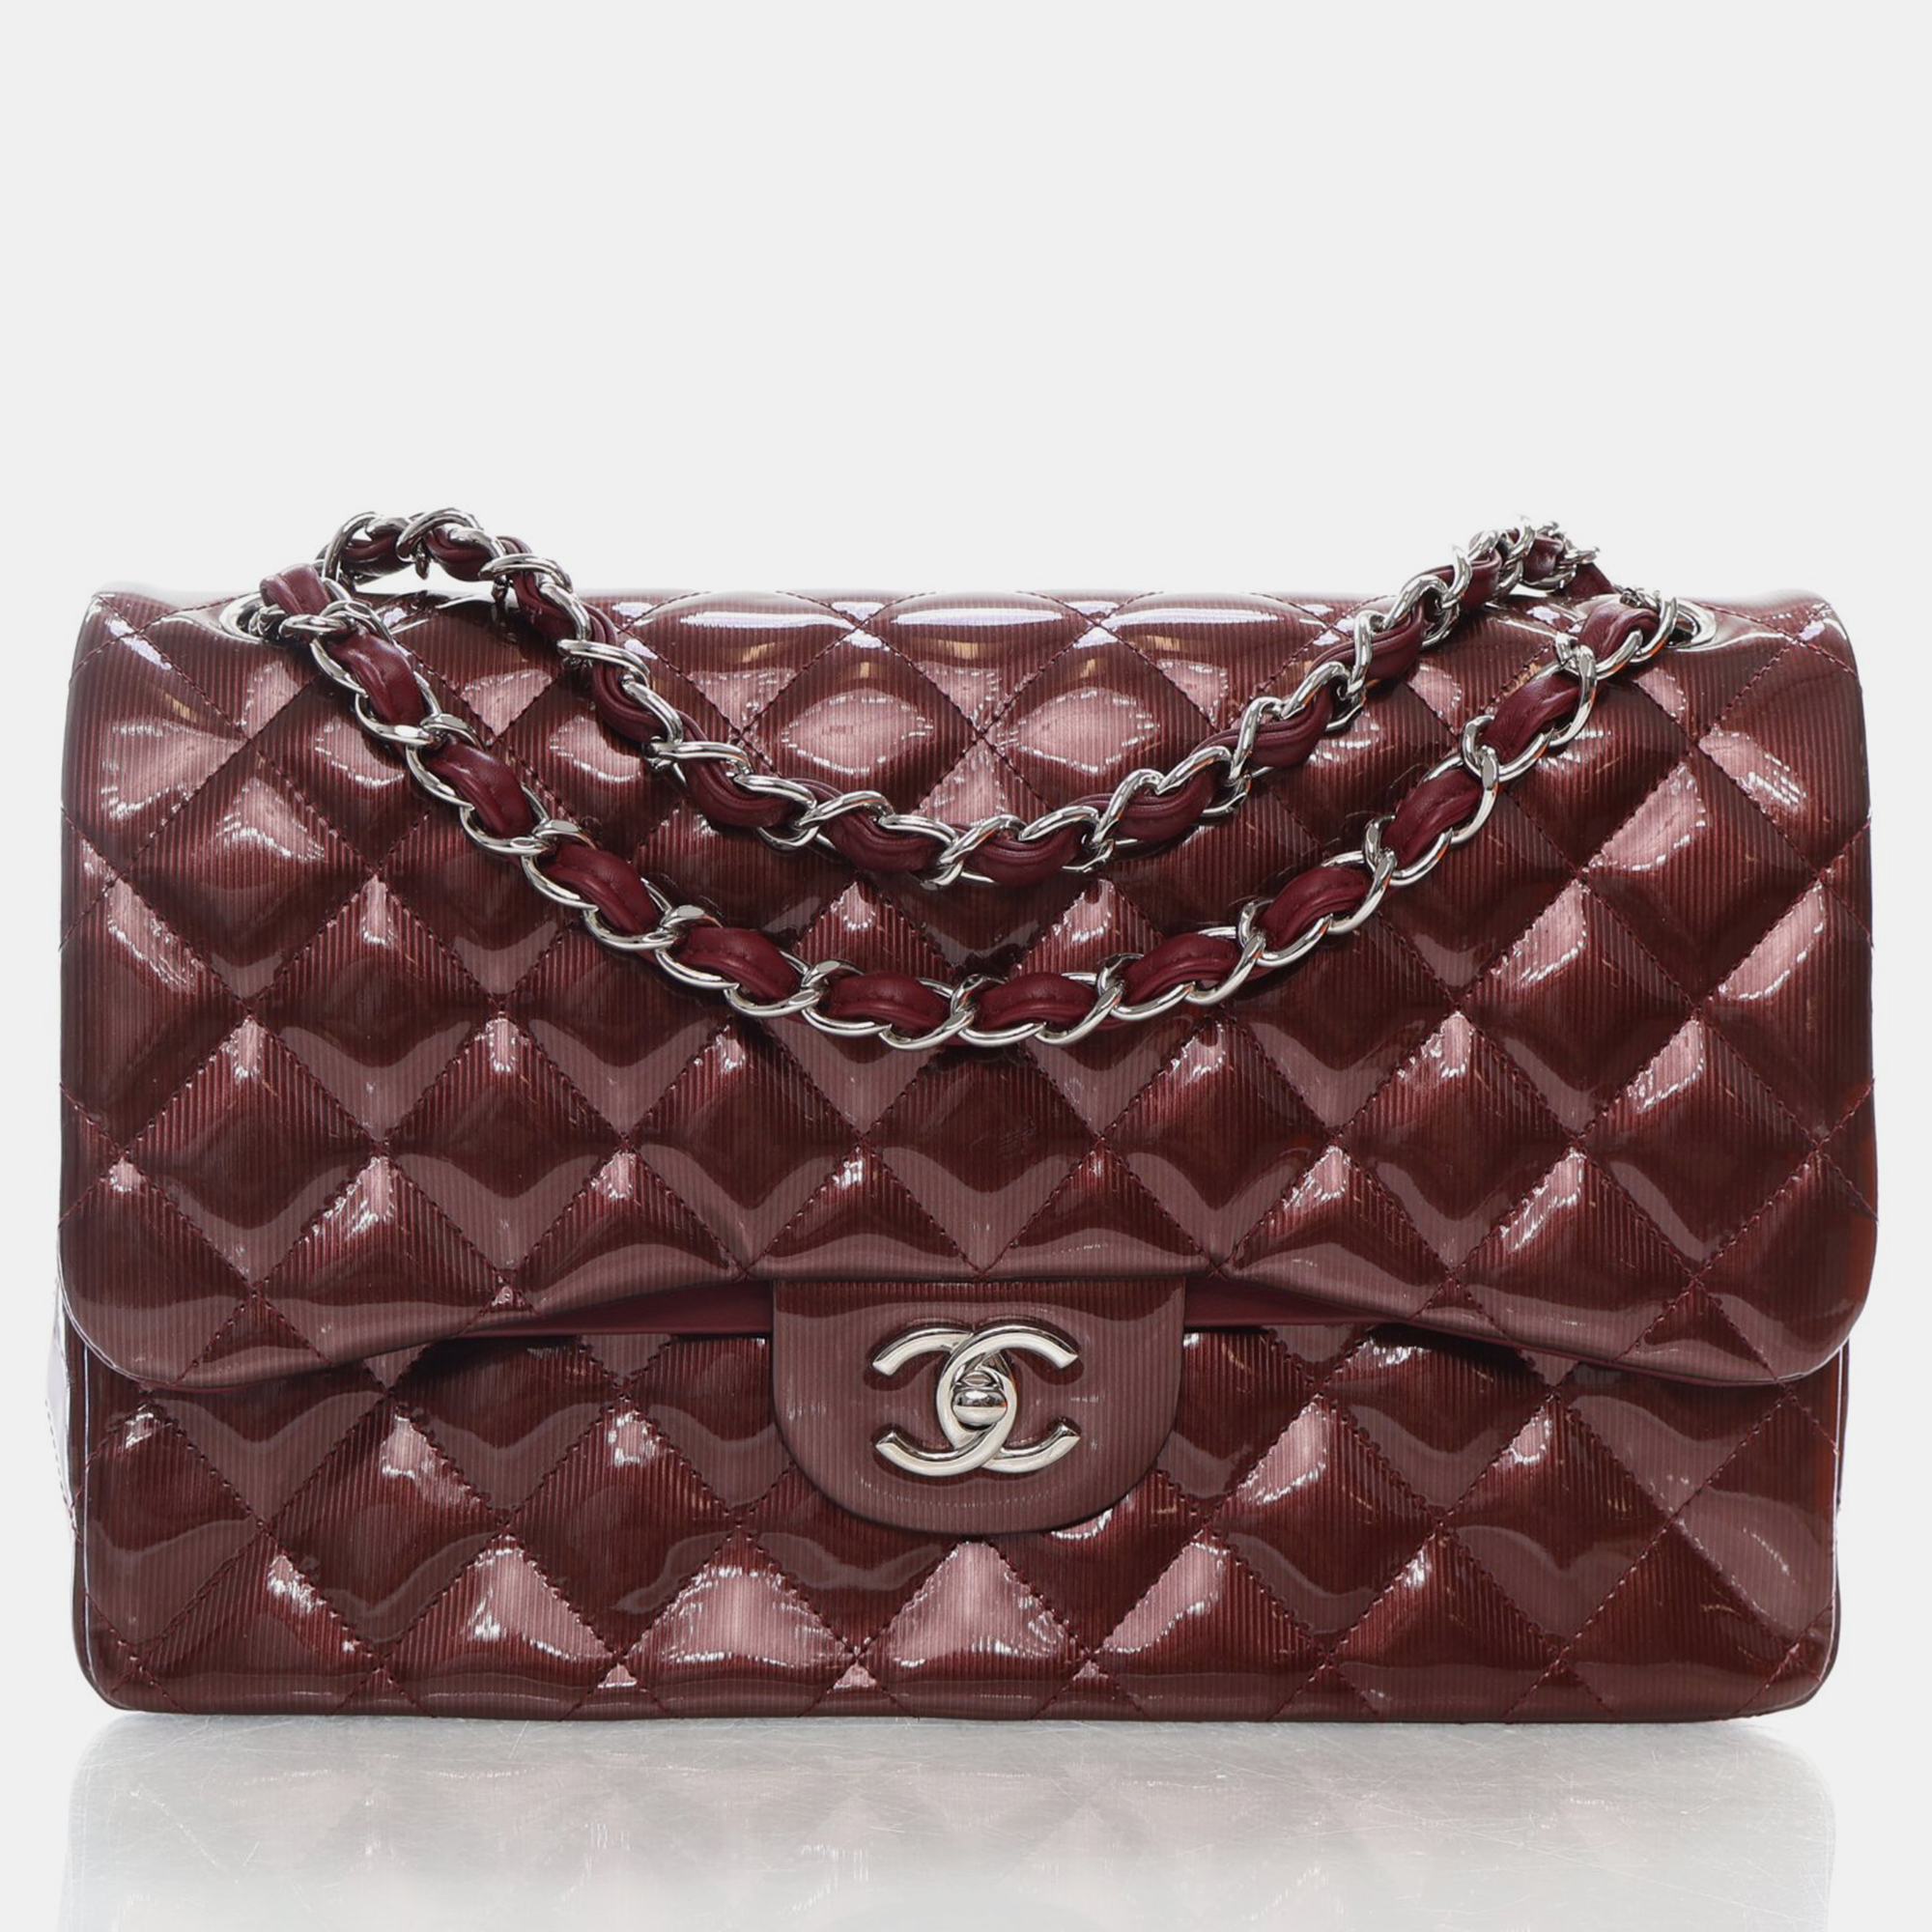 Chanel burgundy patent leather jumbo classic double flap shoulder bag